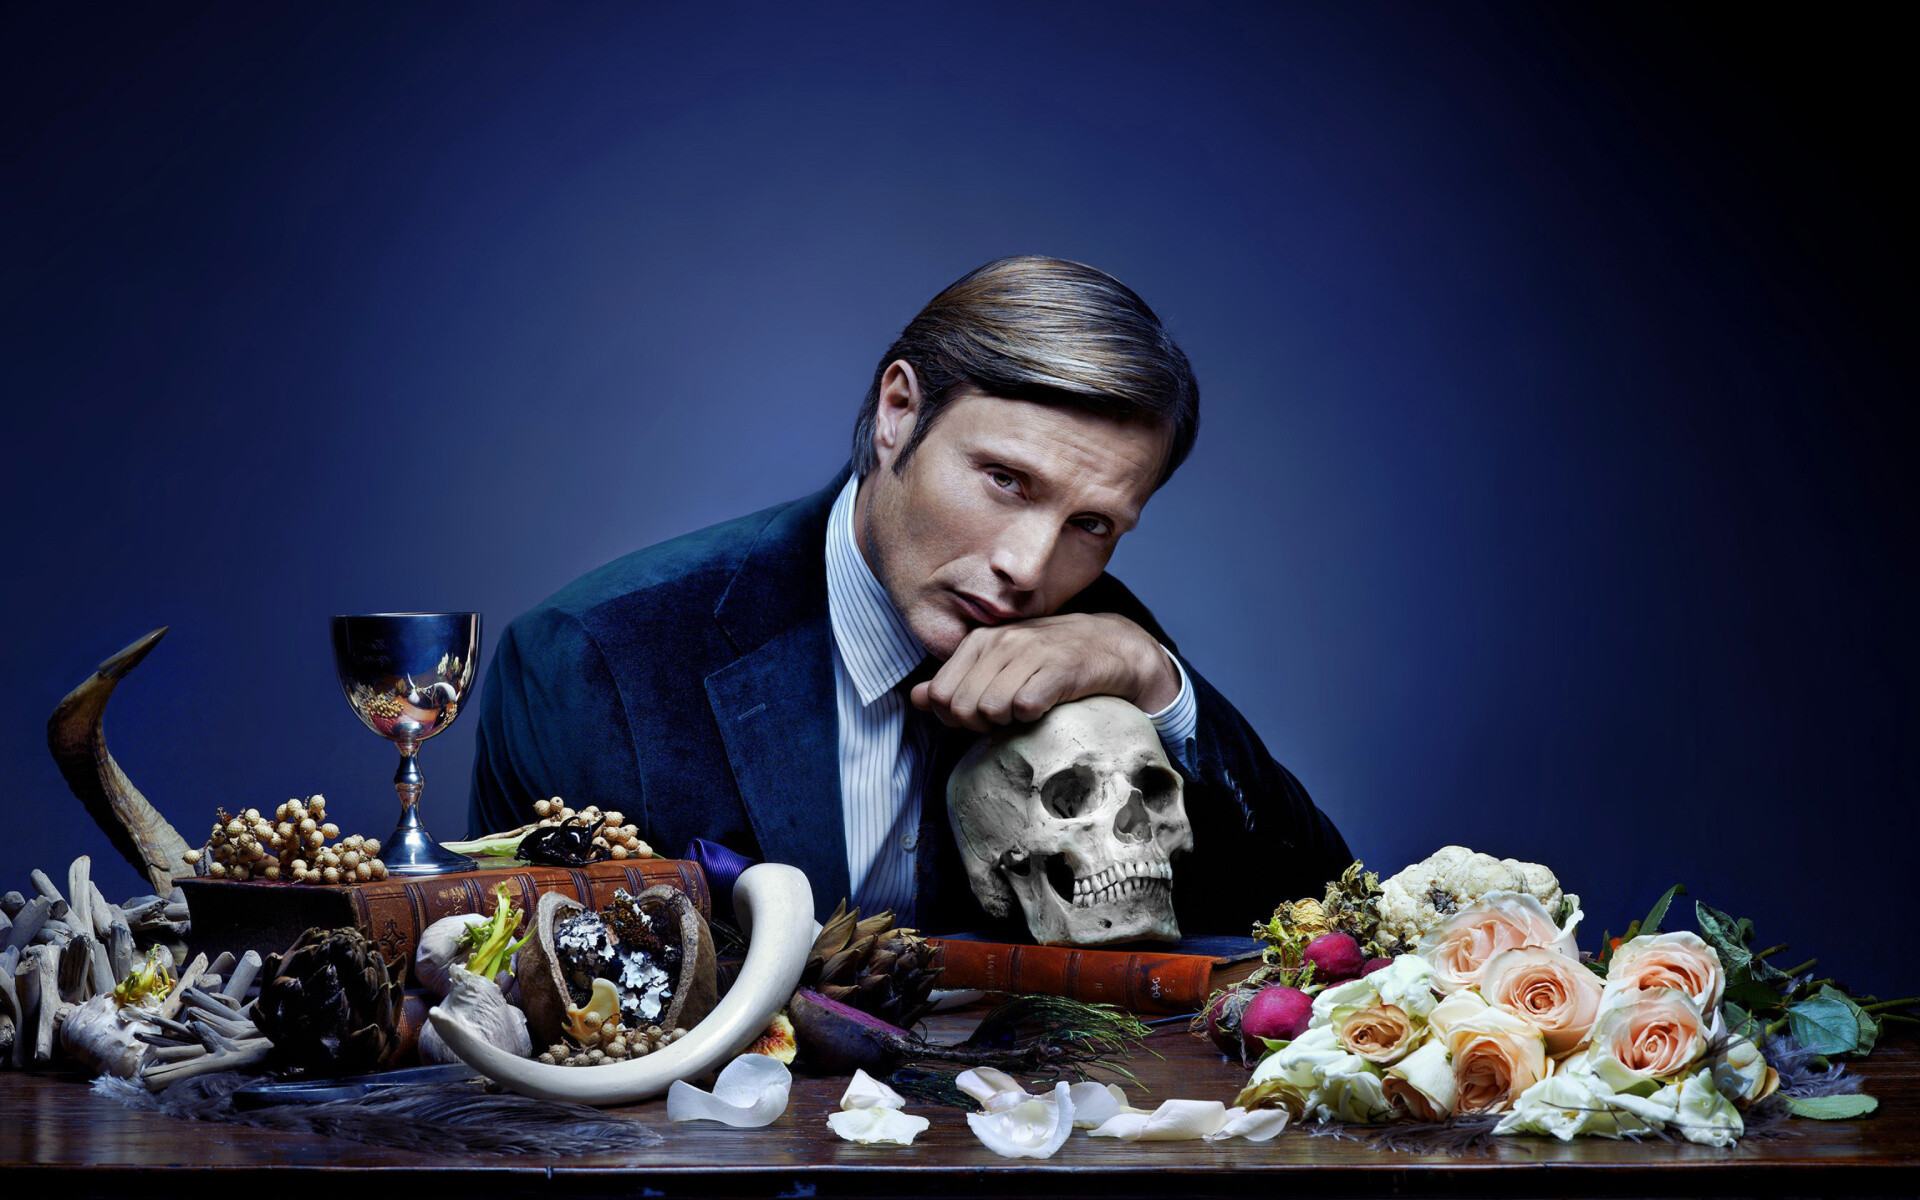 Hannibal (TV Series): The third and final season won the inaugural Saturn Award for Best Action-Thriller Television Series. 1920x1200 HD Background.